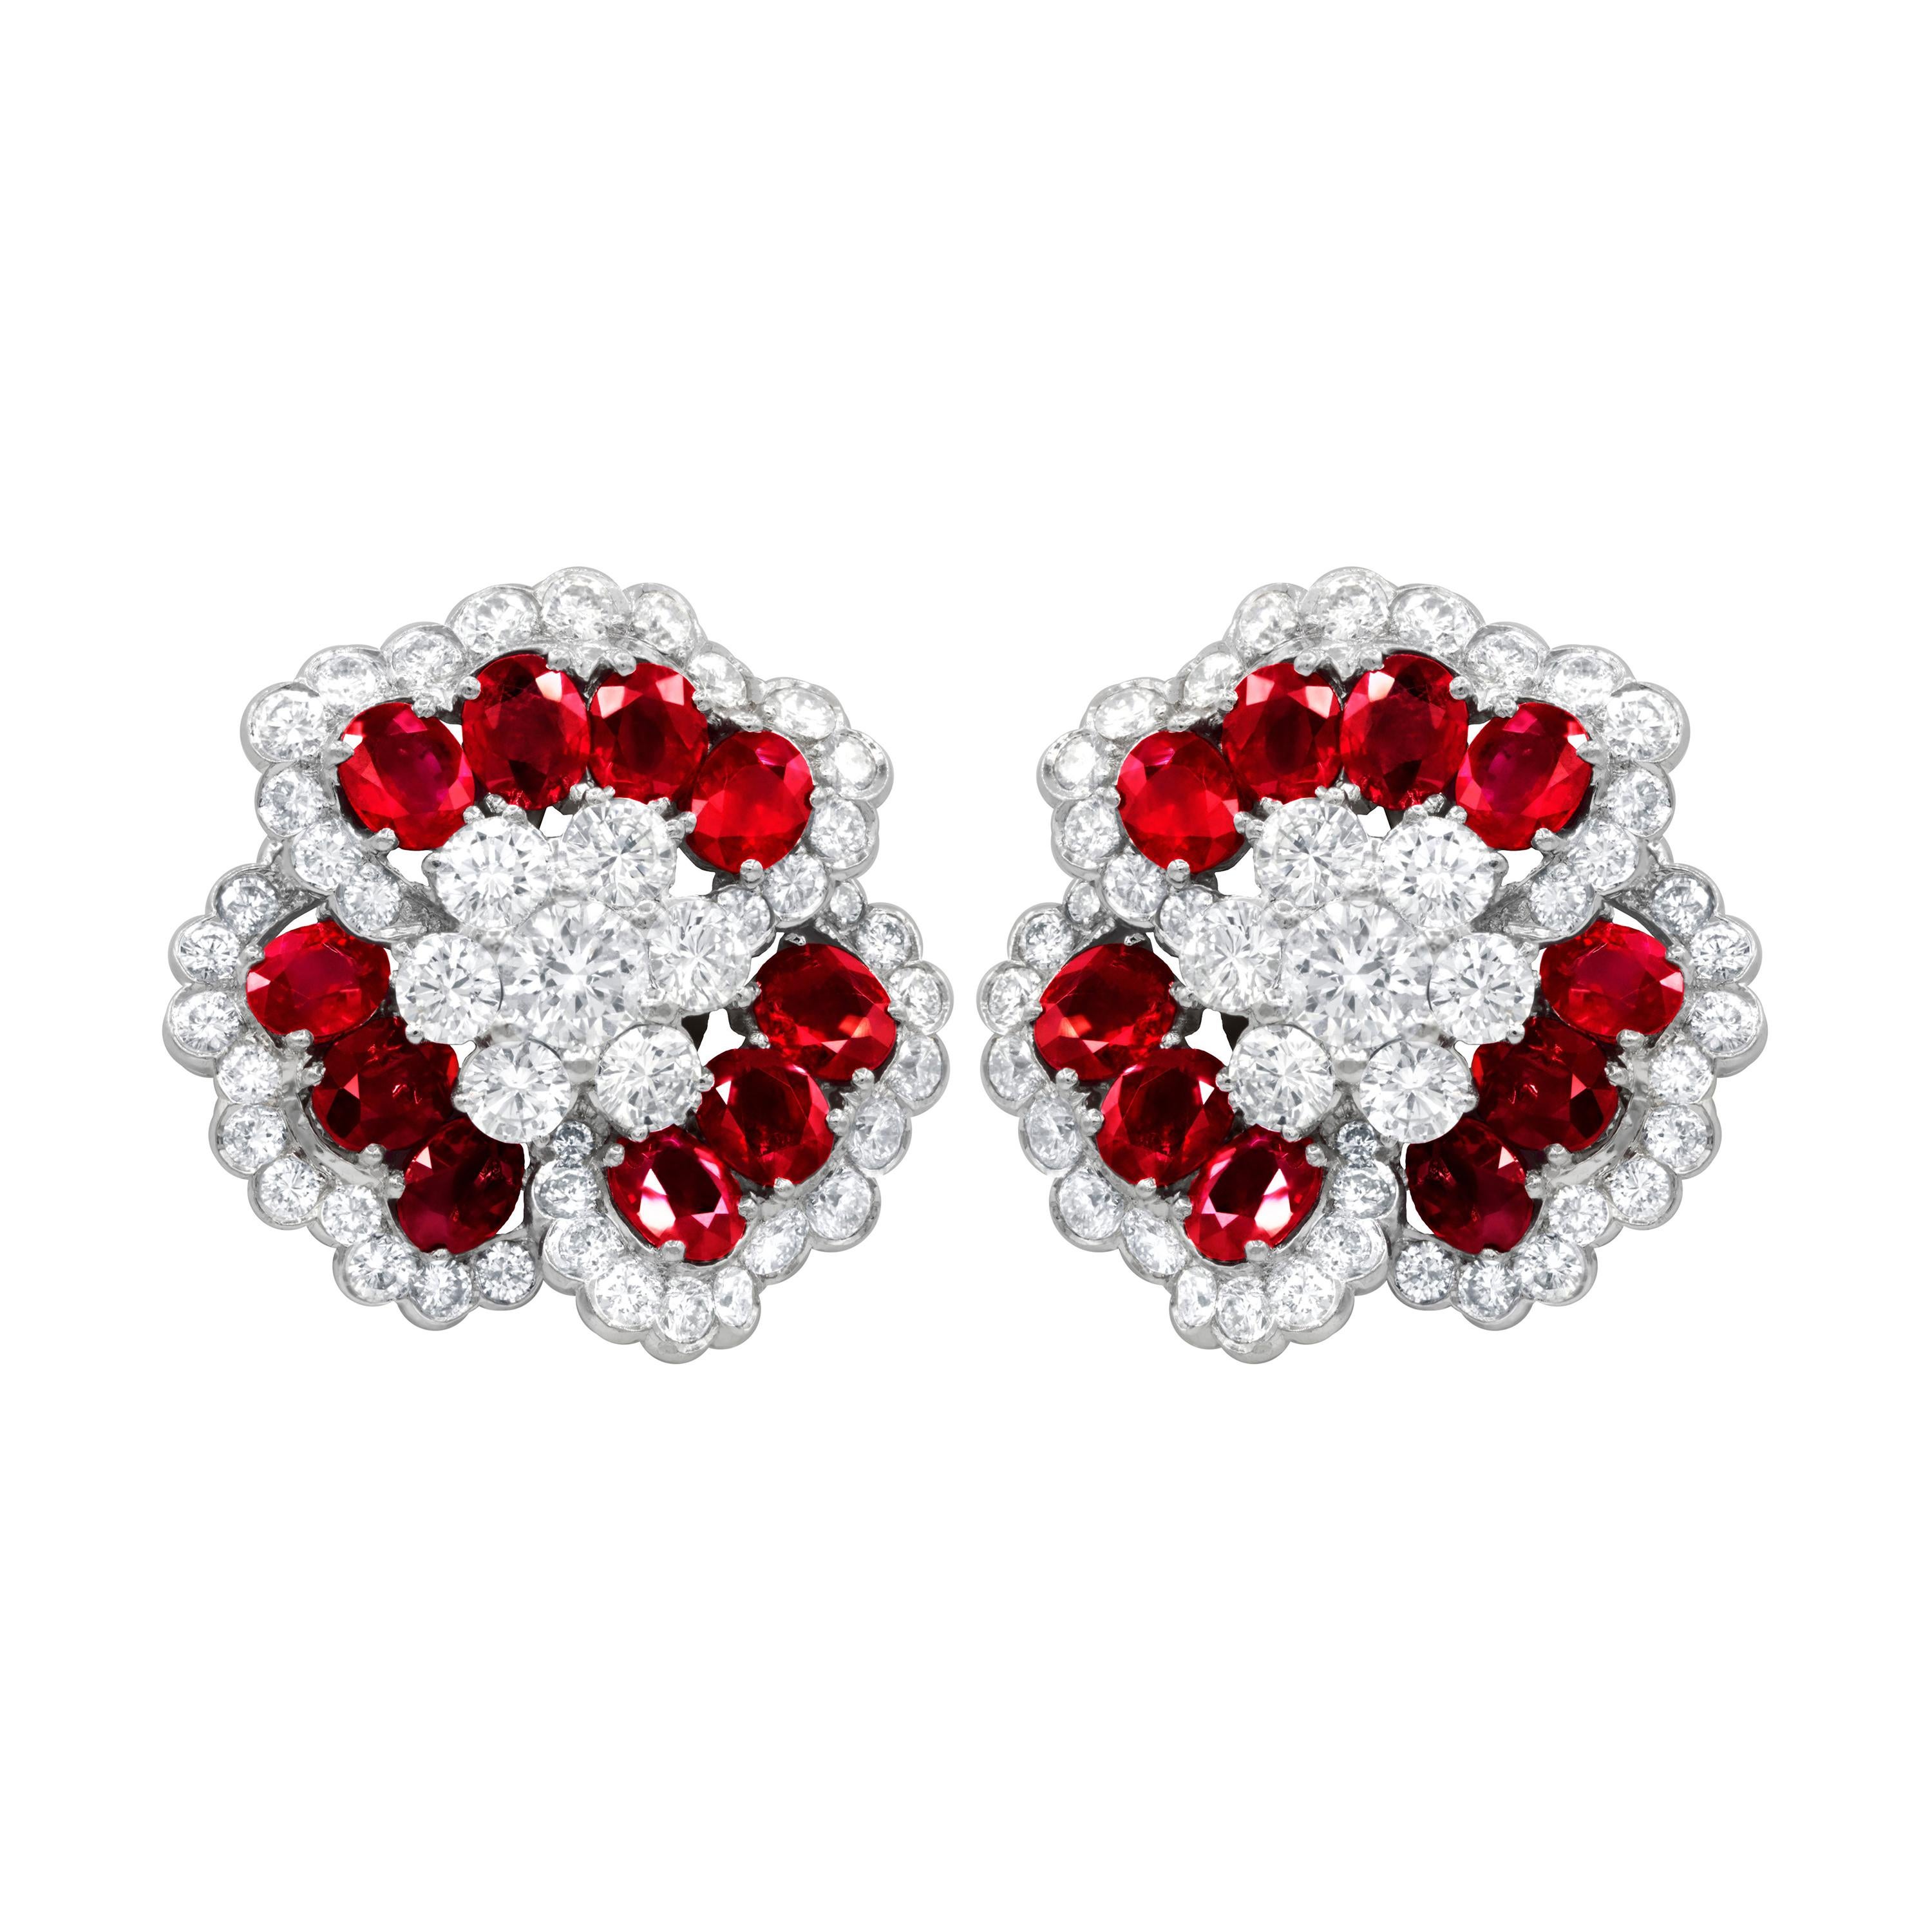 Diana M. Platinum Earrings with Rubies and Diamonds For Sale